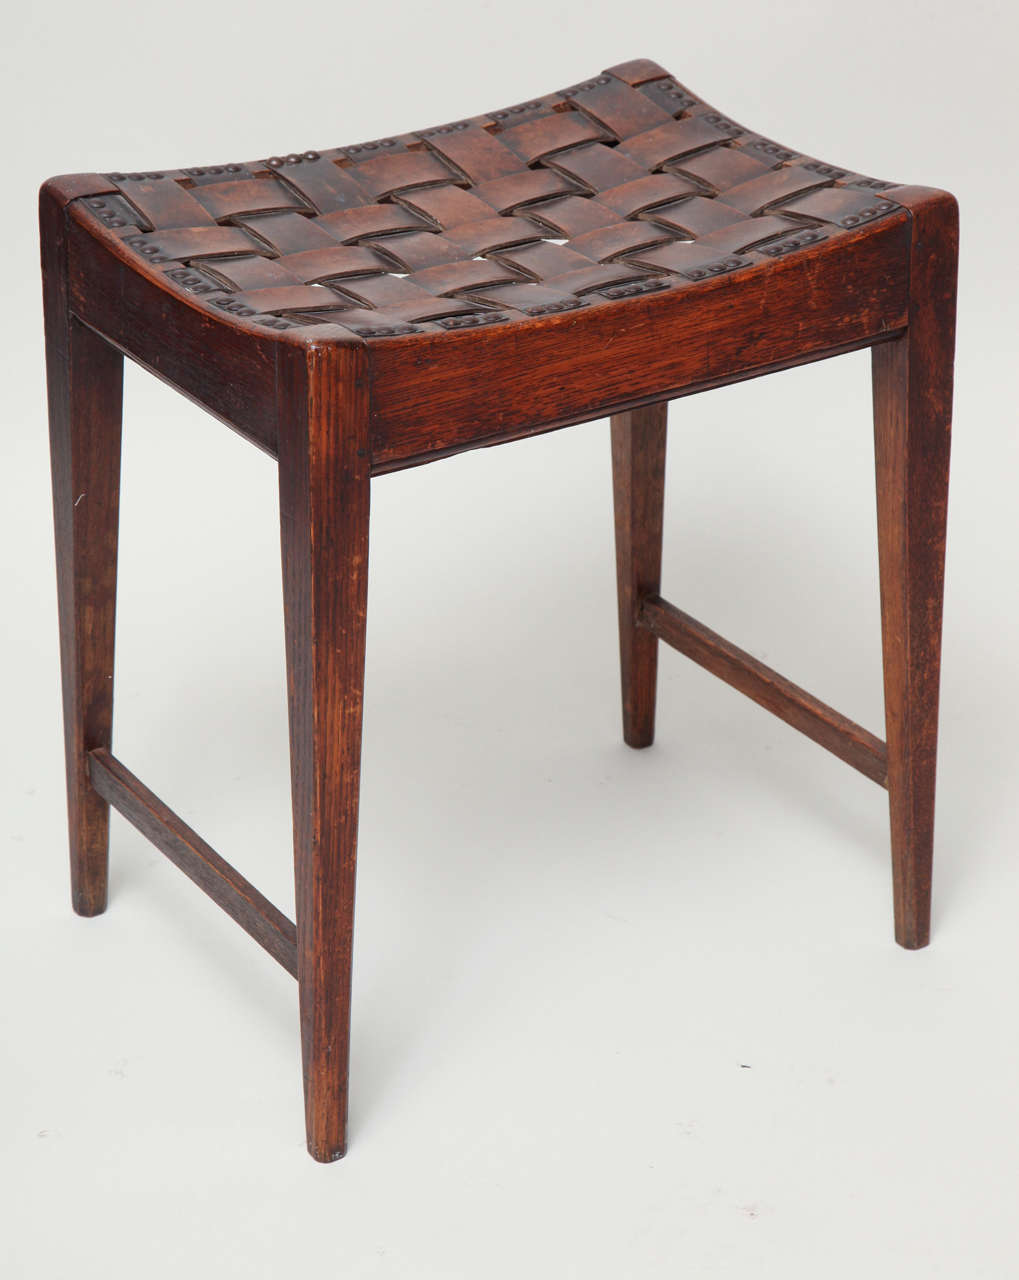 Very good English Arts and Crafts stool made by Arthur Simpson of Kendall, the original leather woven strap work seat on concave rails, the frame in nicely patinated oak, with square tapered legs joined by bar stretchers.